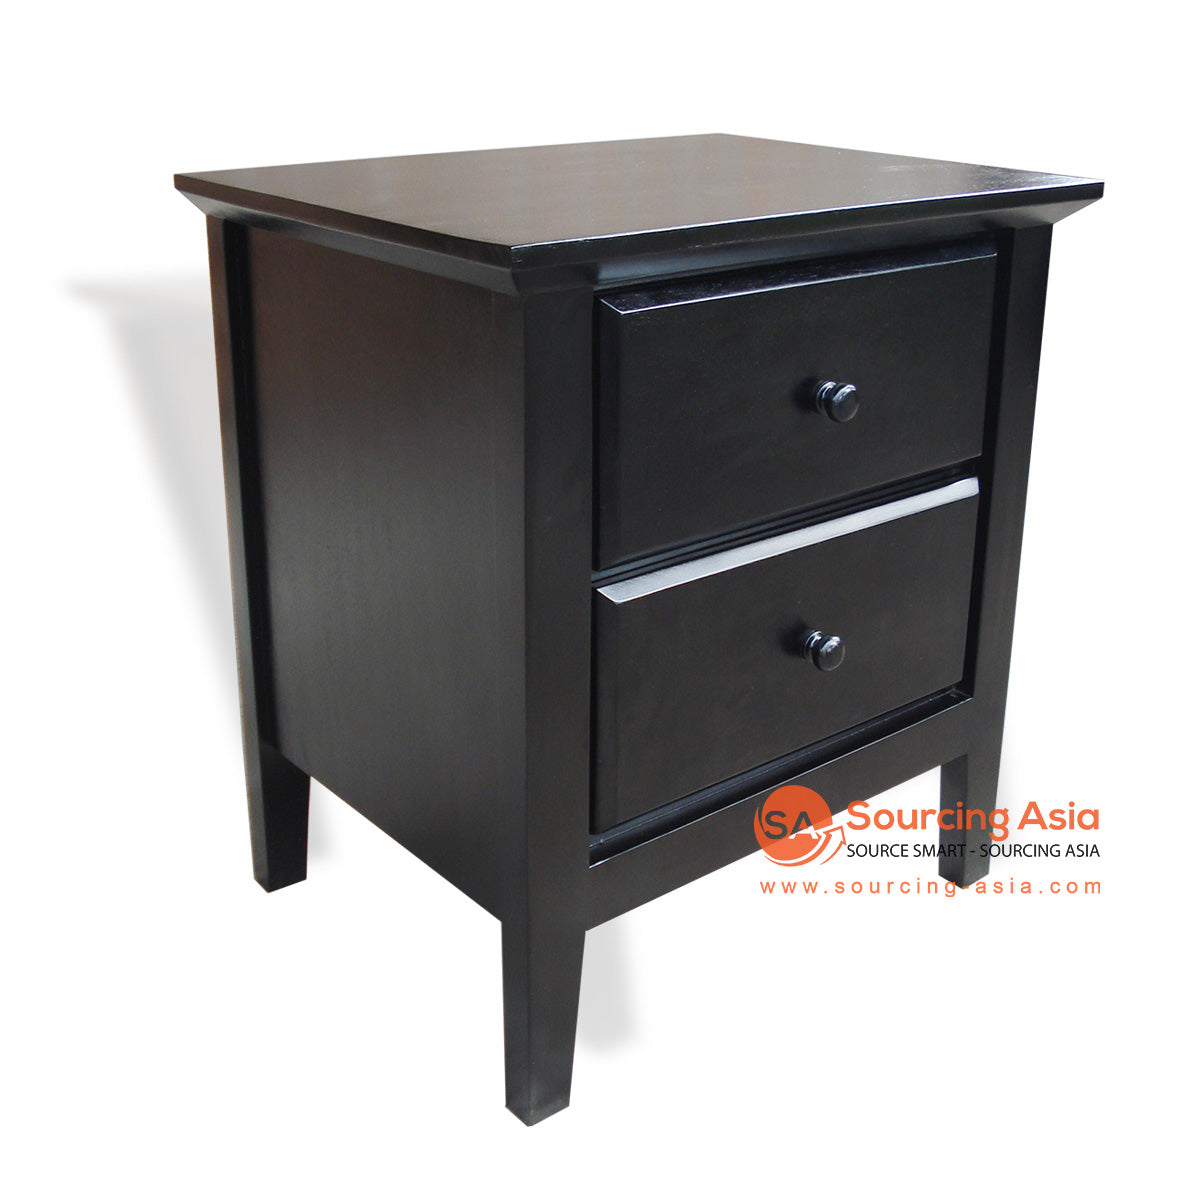 WI-SPNW005 SHARP BROWN MAHOGANY WOOD TWO DRAWERS SIDE TABLE